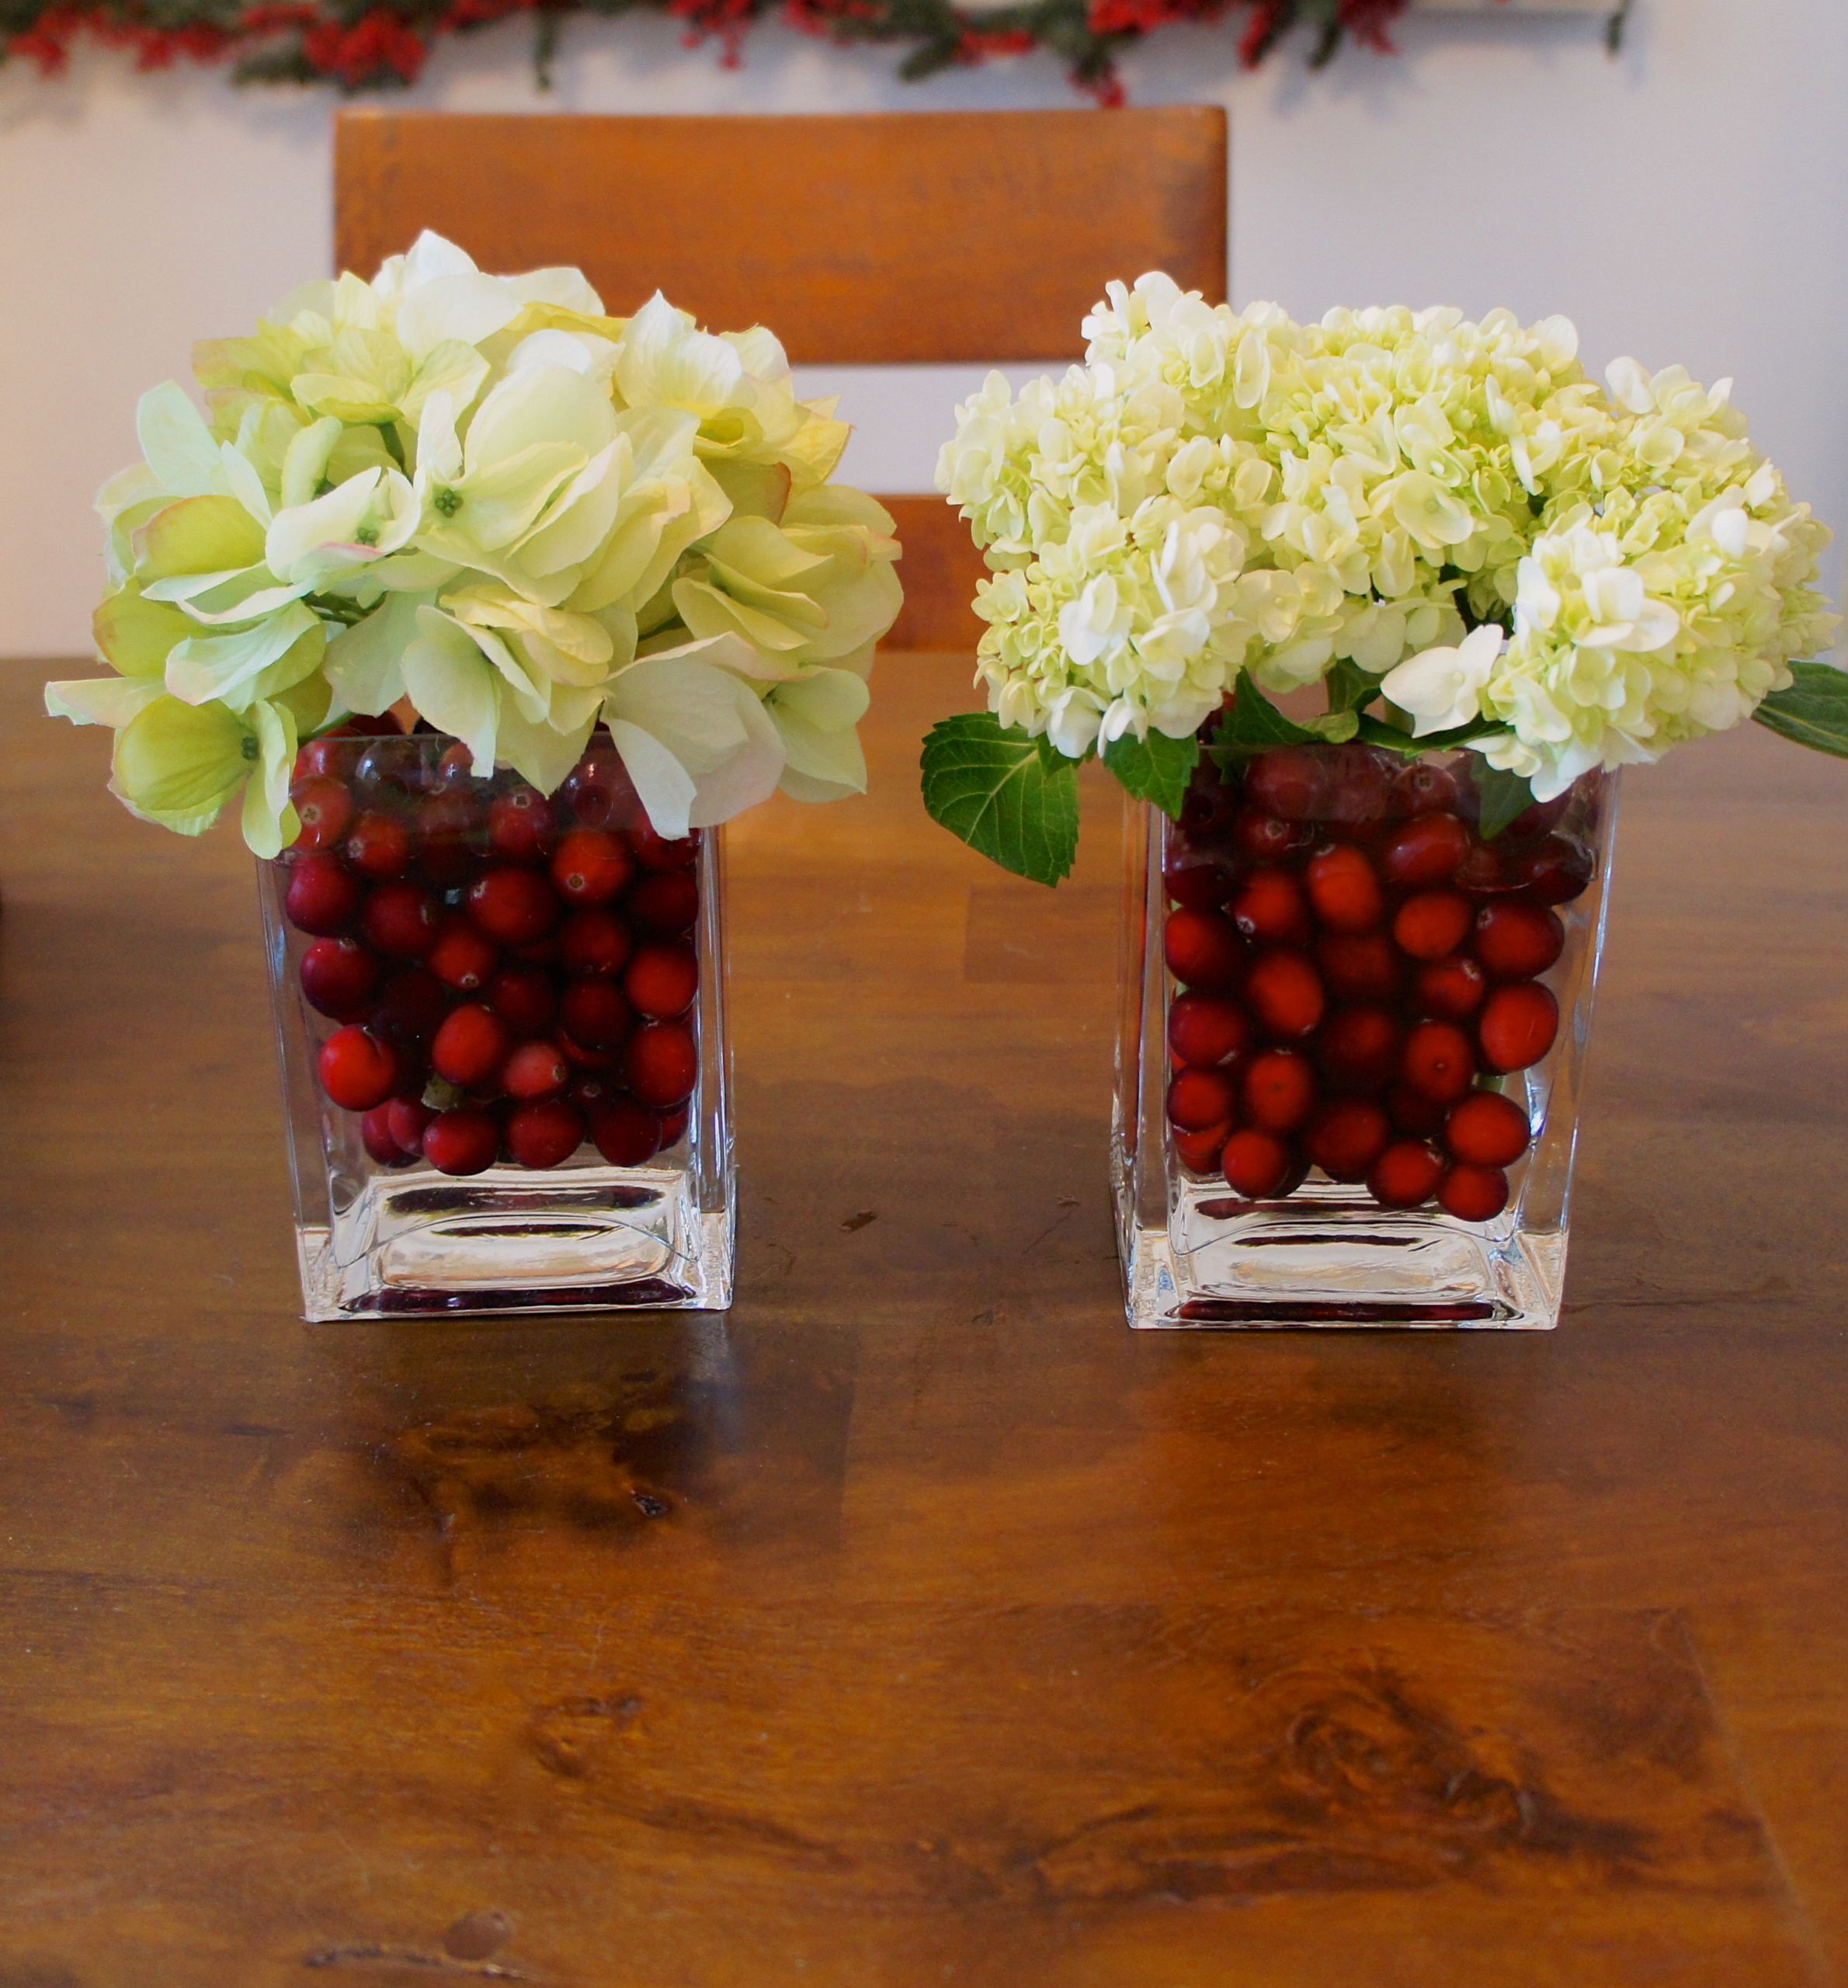 Cheap Christmas Party Ideas
 $5 Holiday Centerpieces